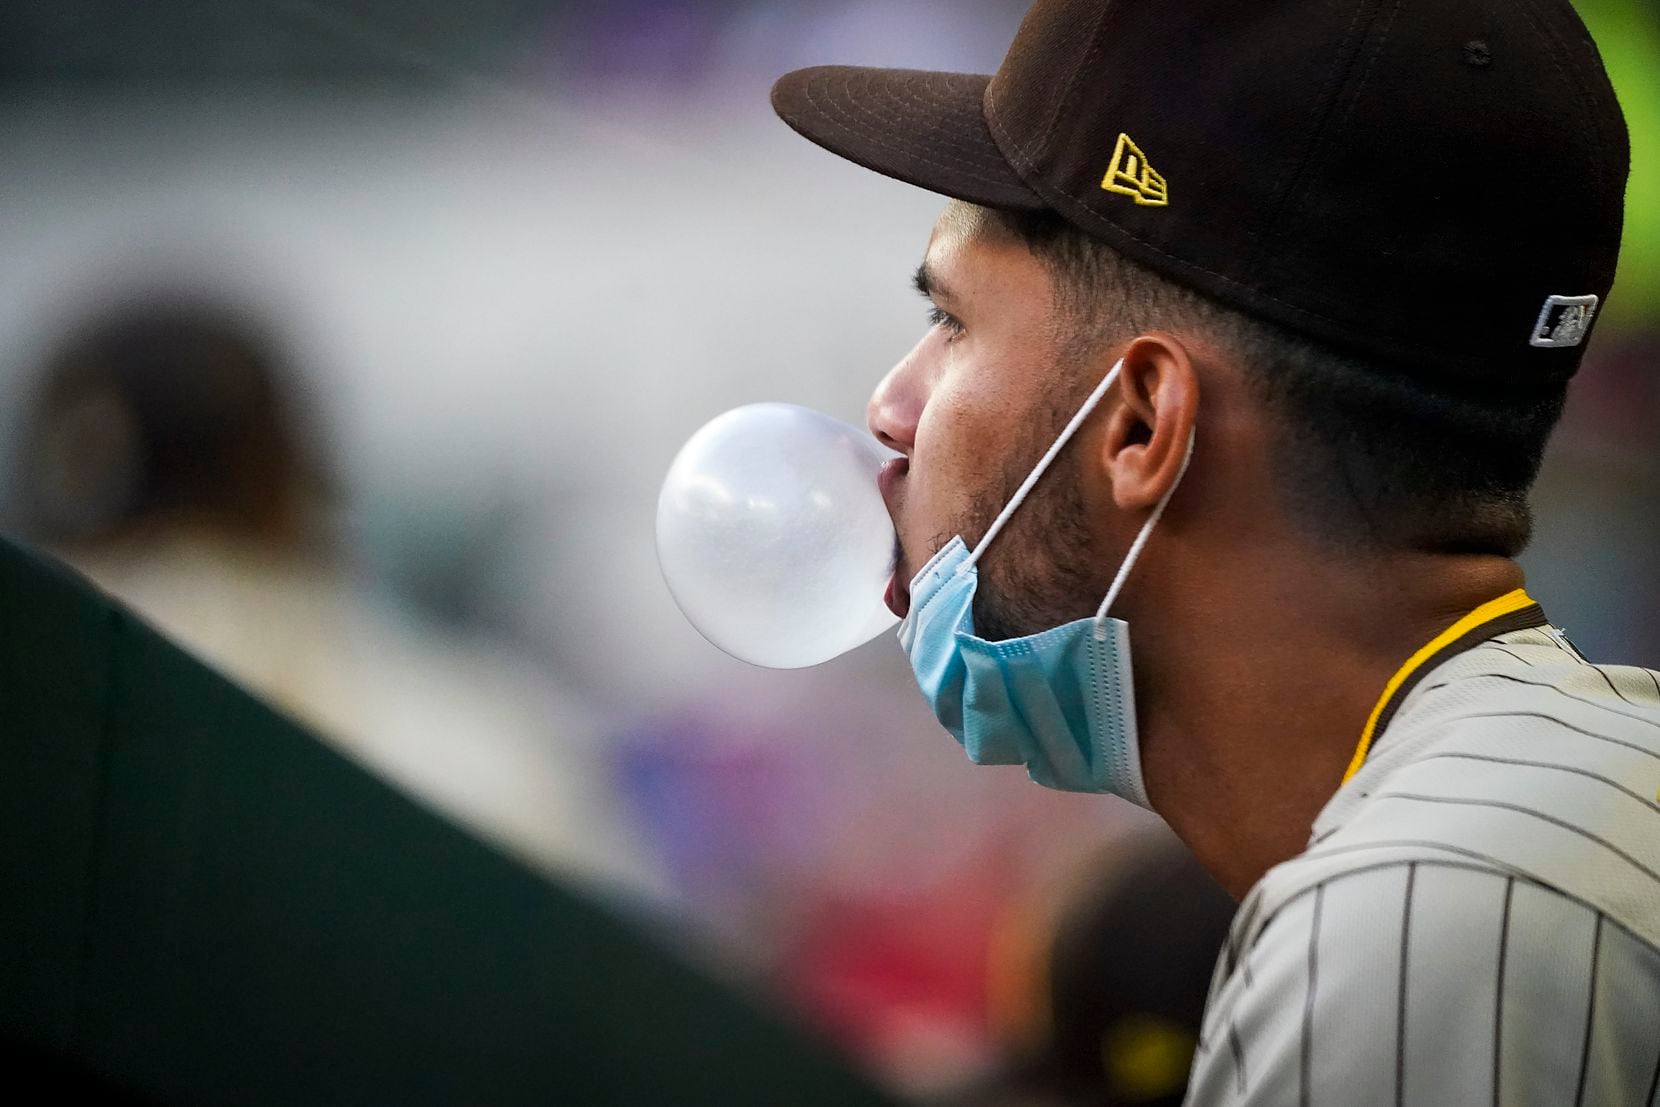 San Diego Padres second baseman Tucupita Marcano didn’t let his face mask stop him from perfecting his bubble gum game in the Globe Life Field dugout in April.